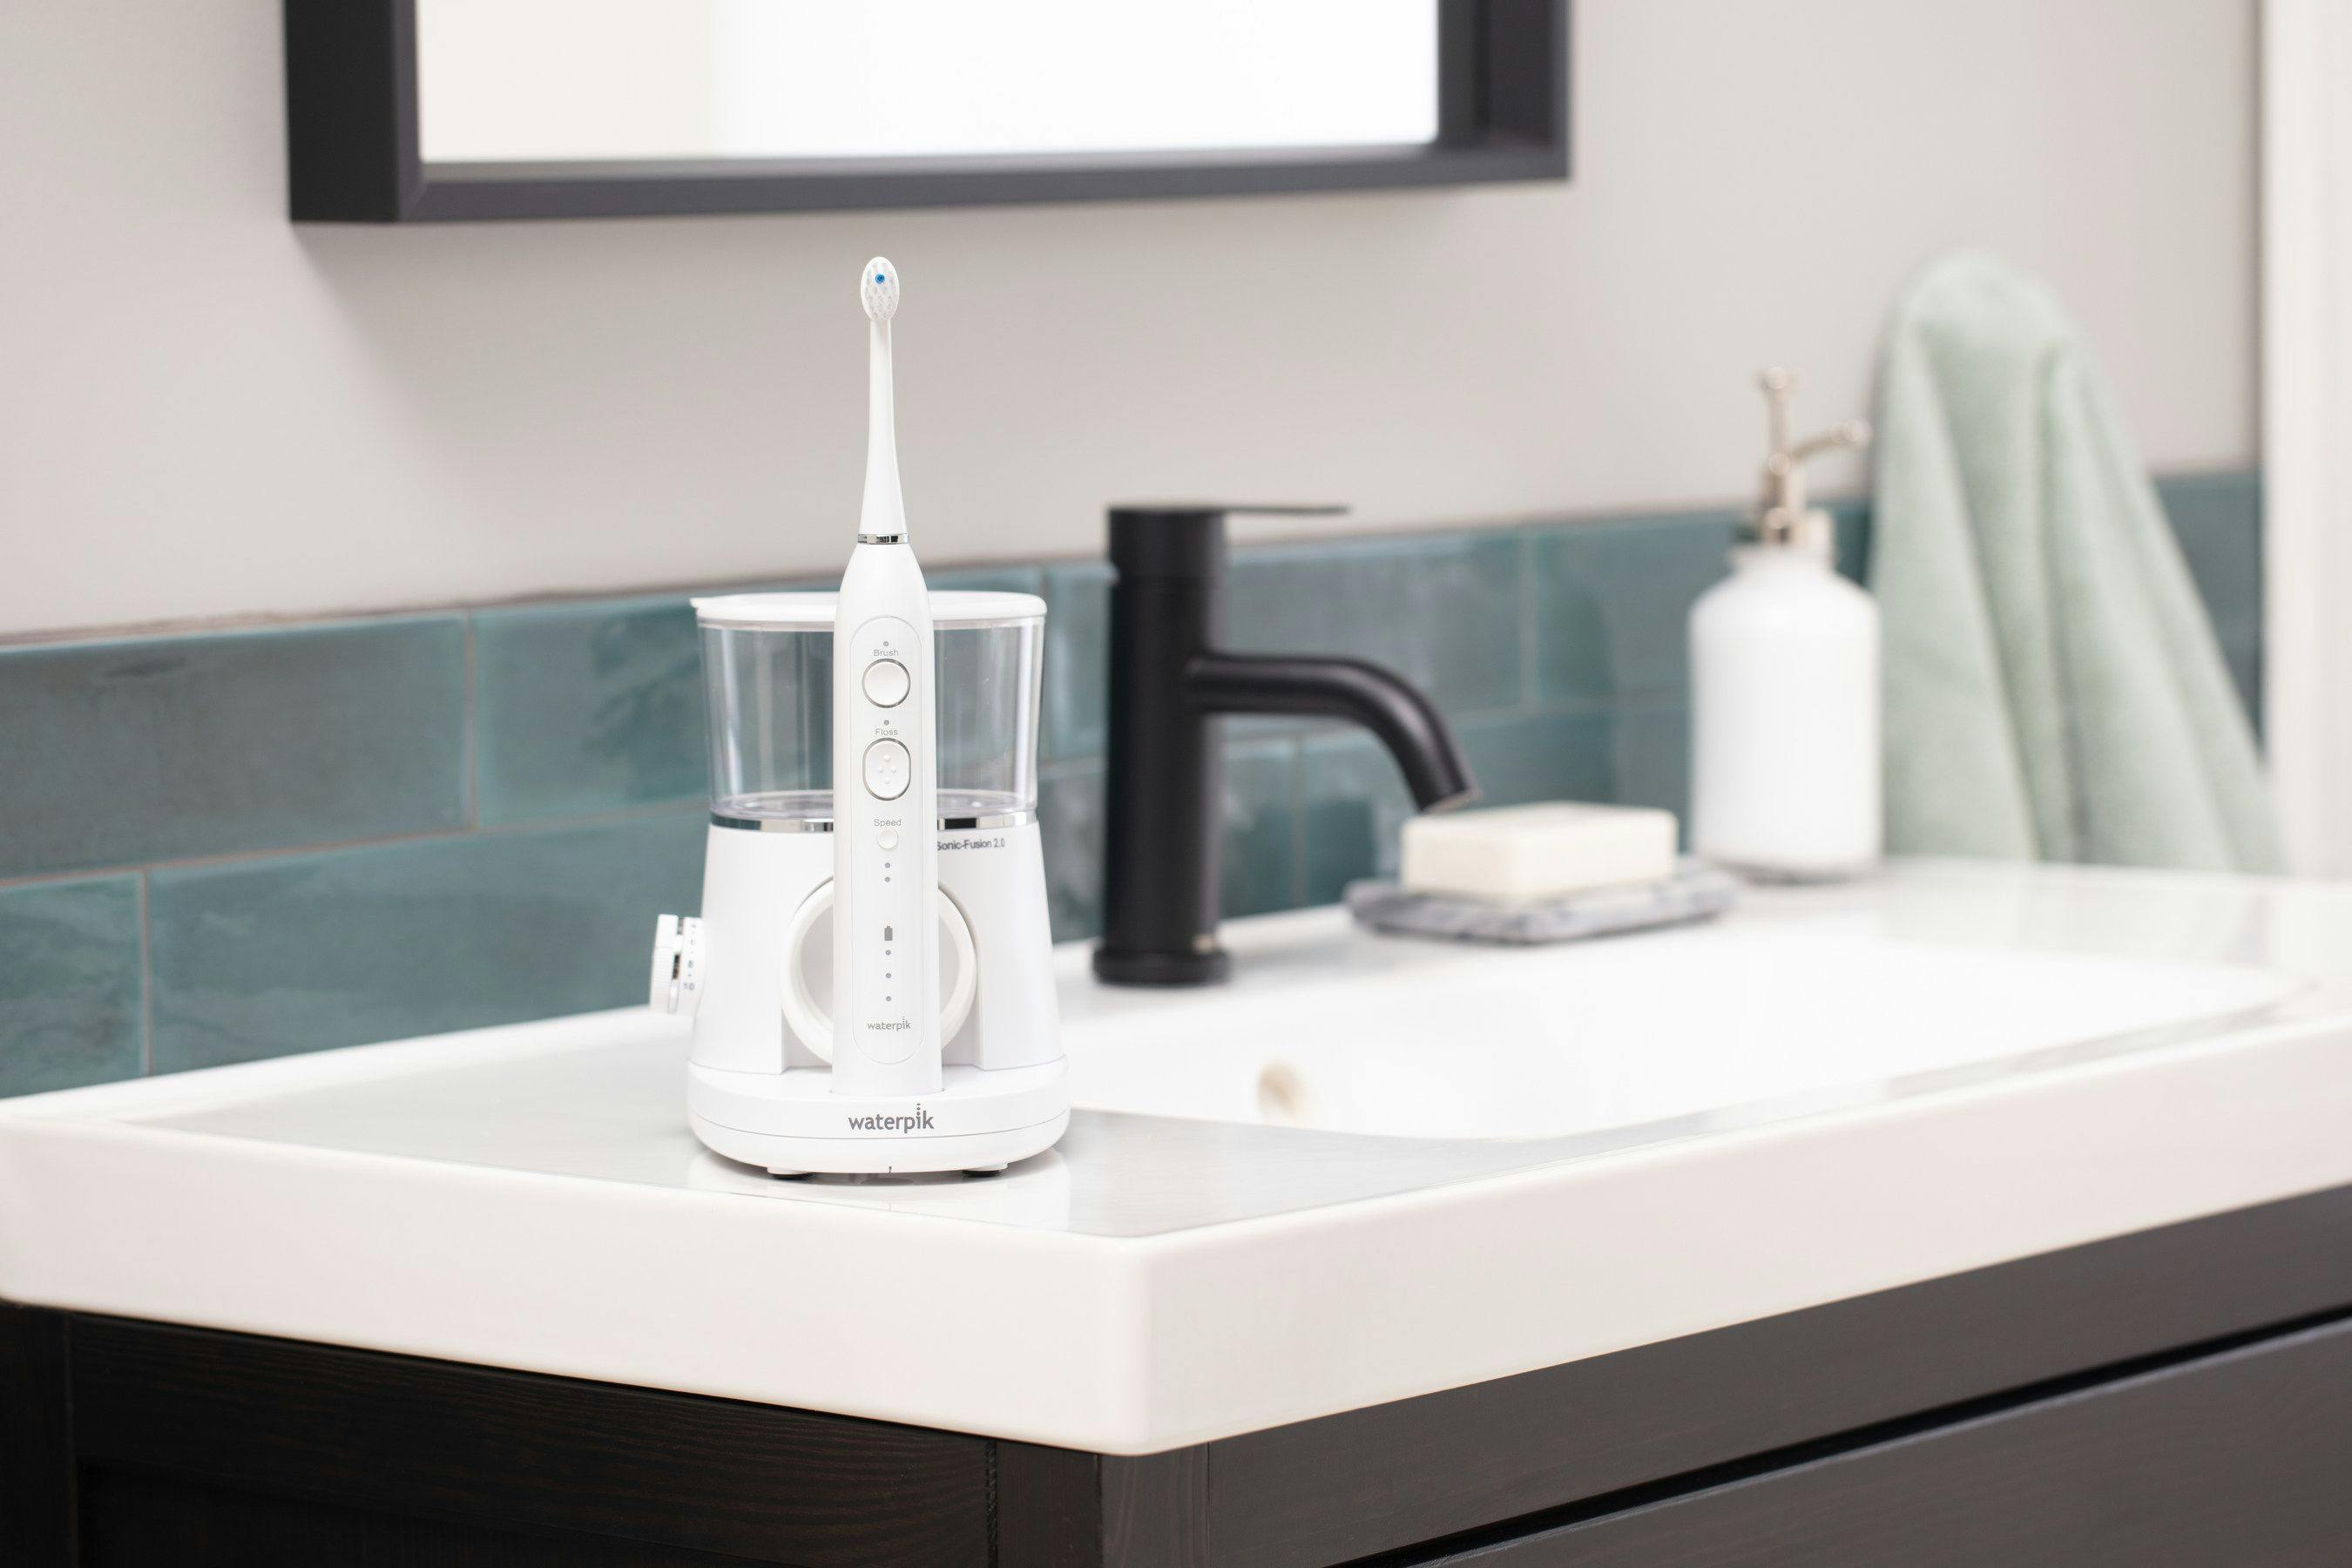 Waterpik sonic-fusion 2.0 flossing electric toothbrush